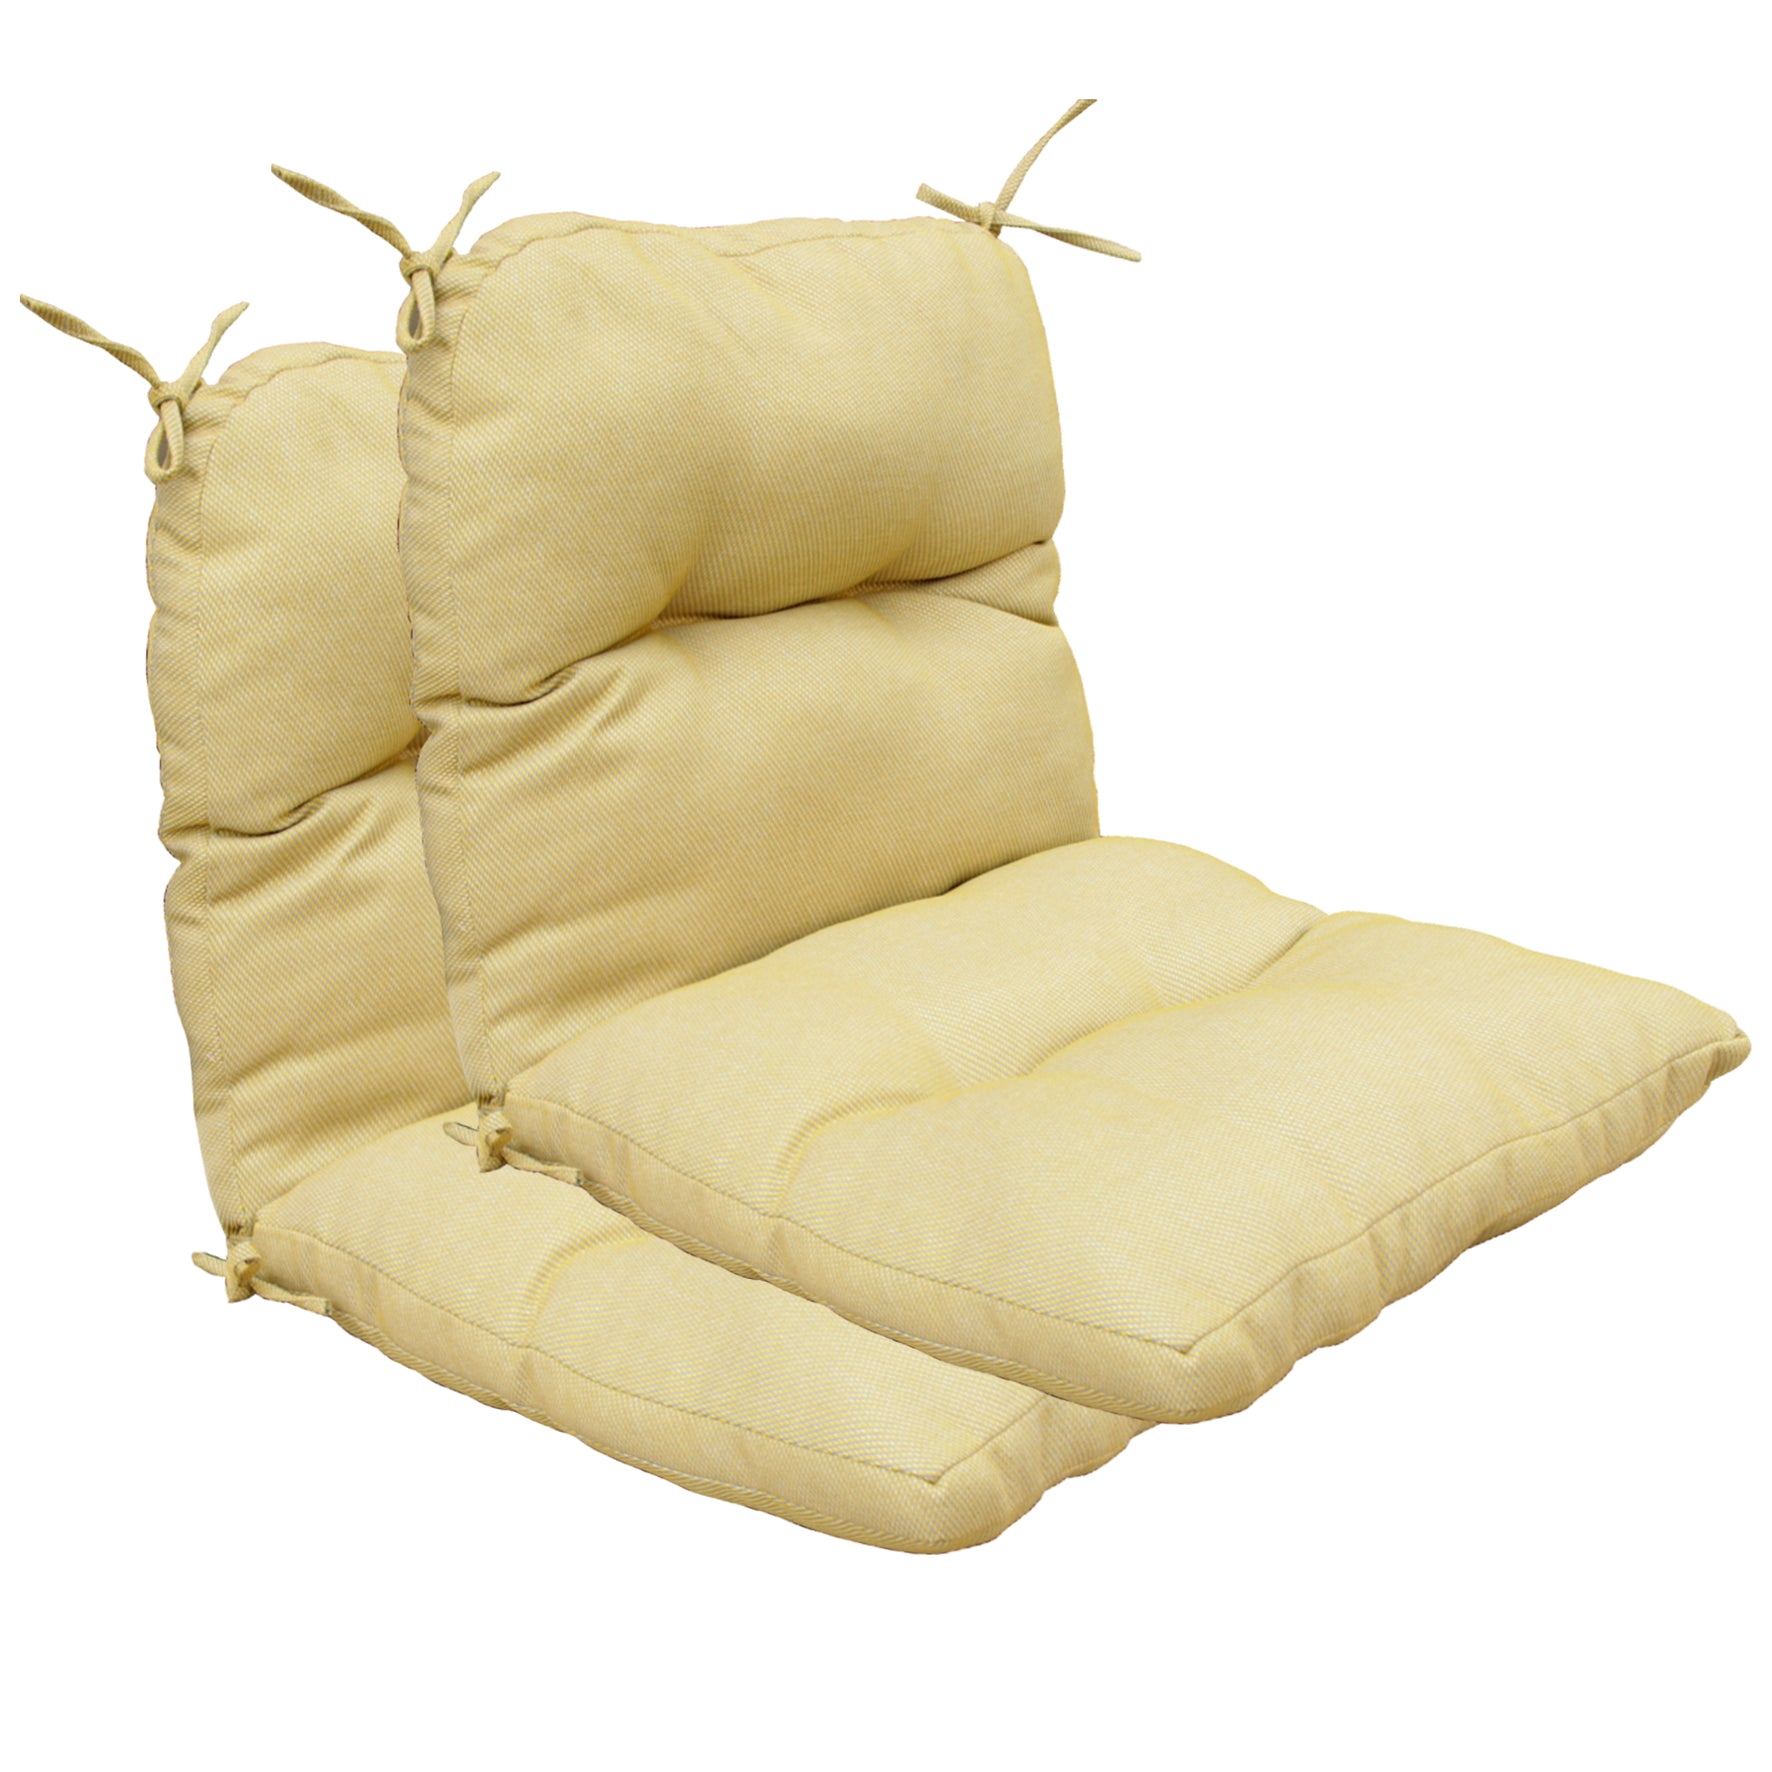 Outdoor Indoor High Back Chair Tufted Cushions Set of 2 Mixed Yellow/Grey